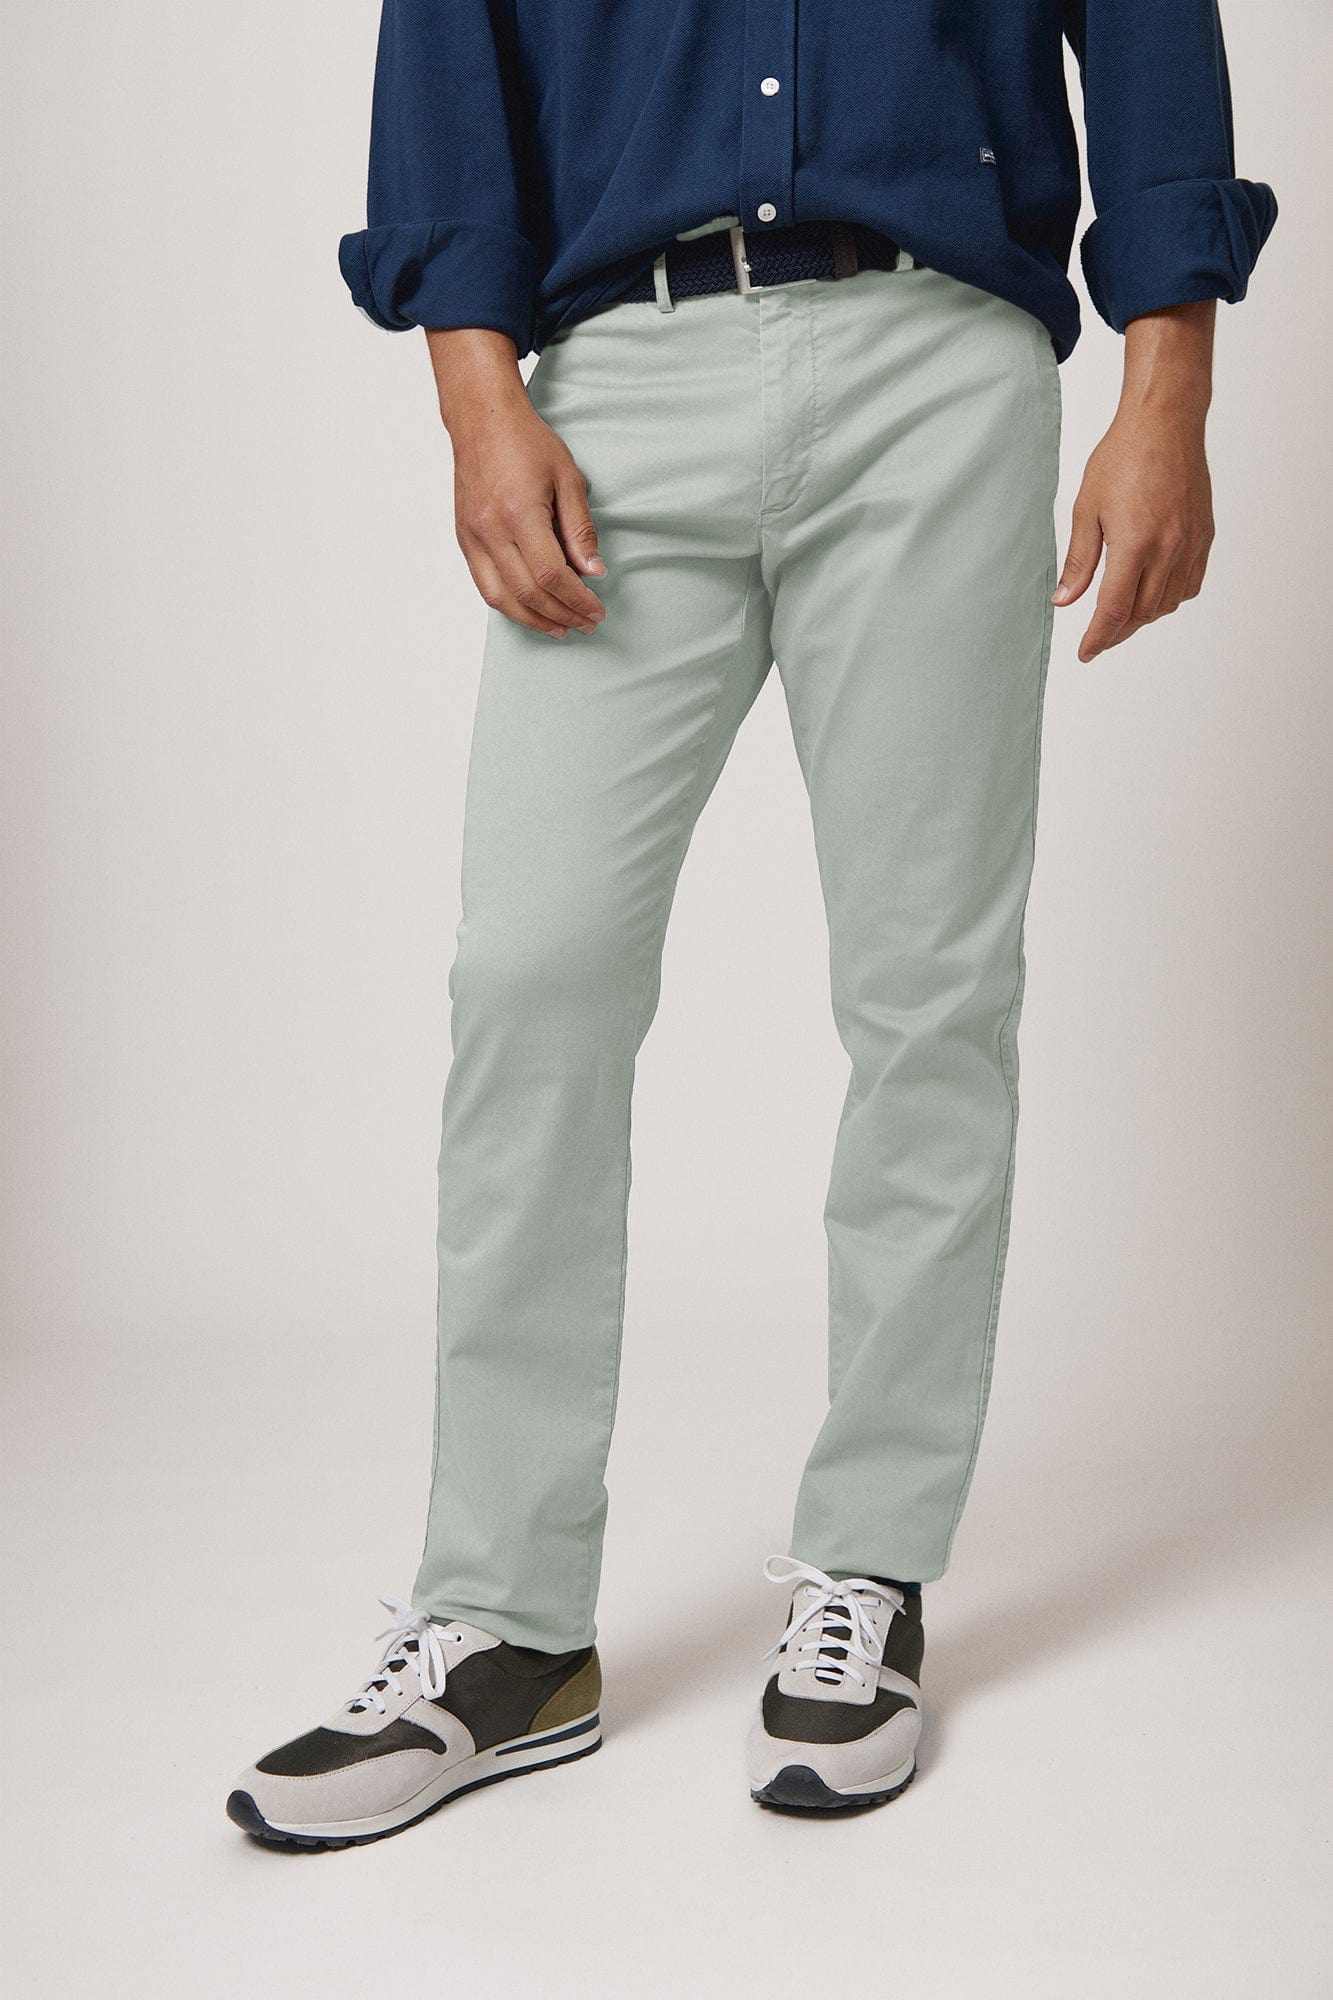 The Chino Verde Figueras